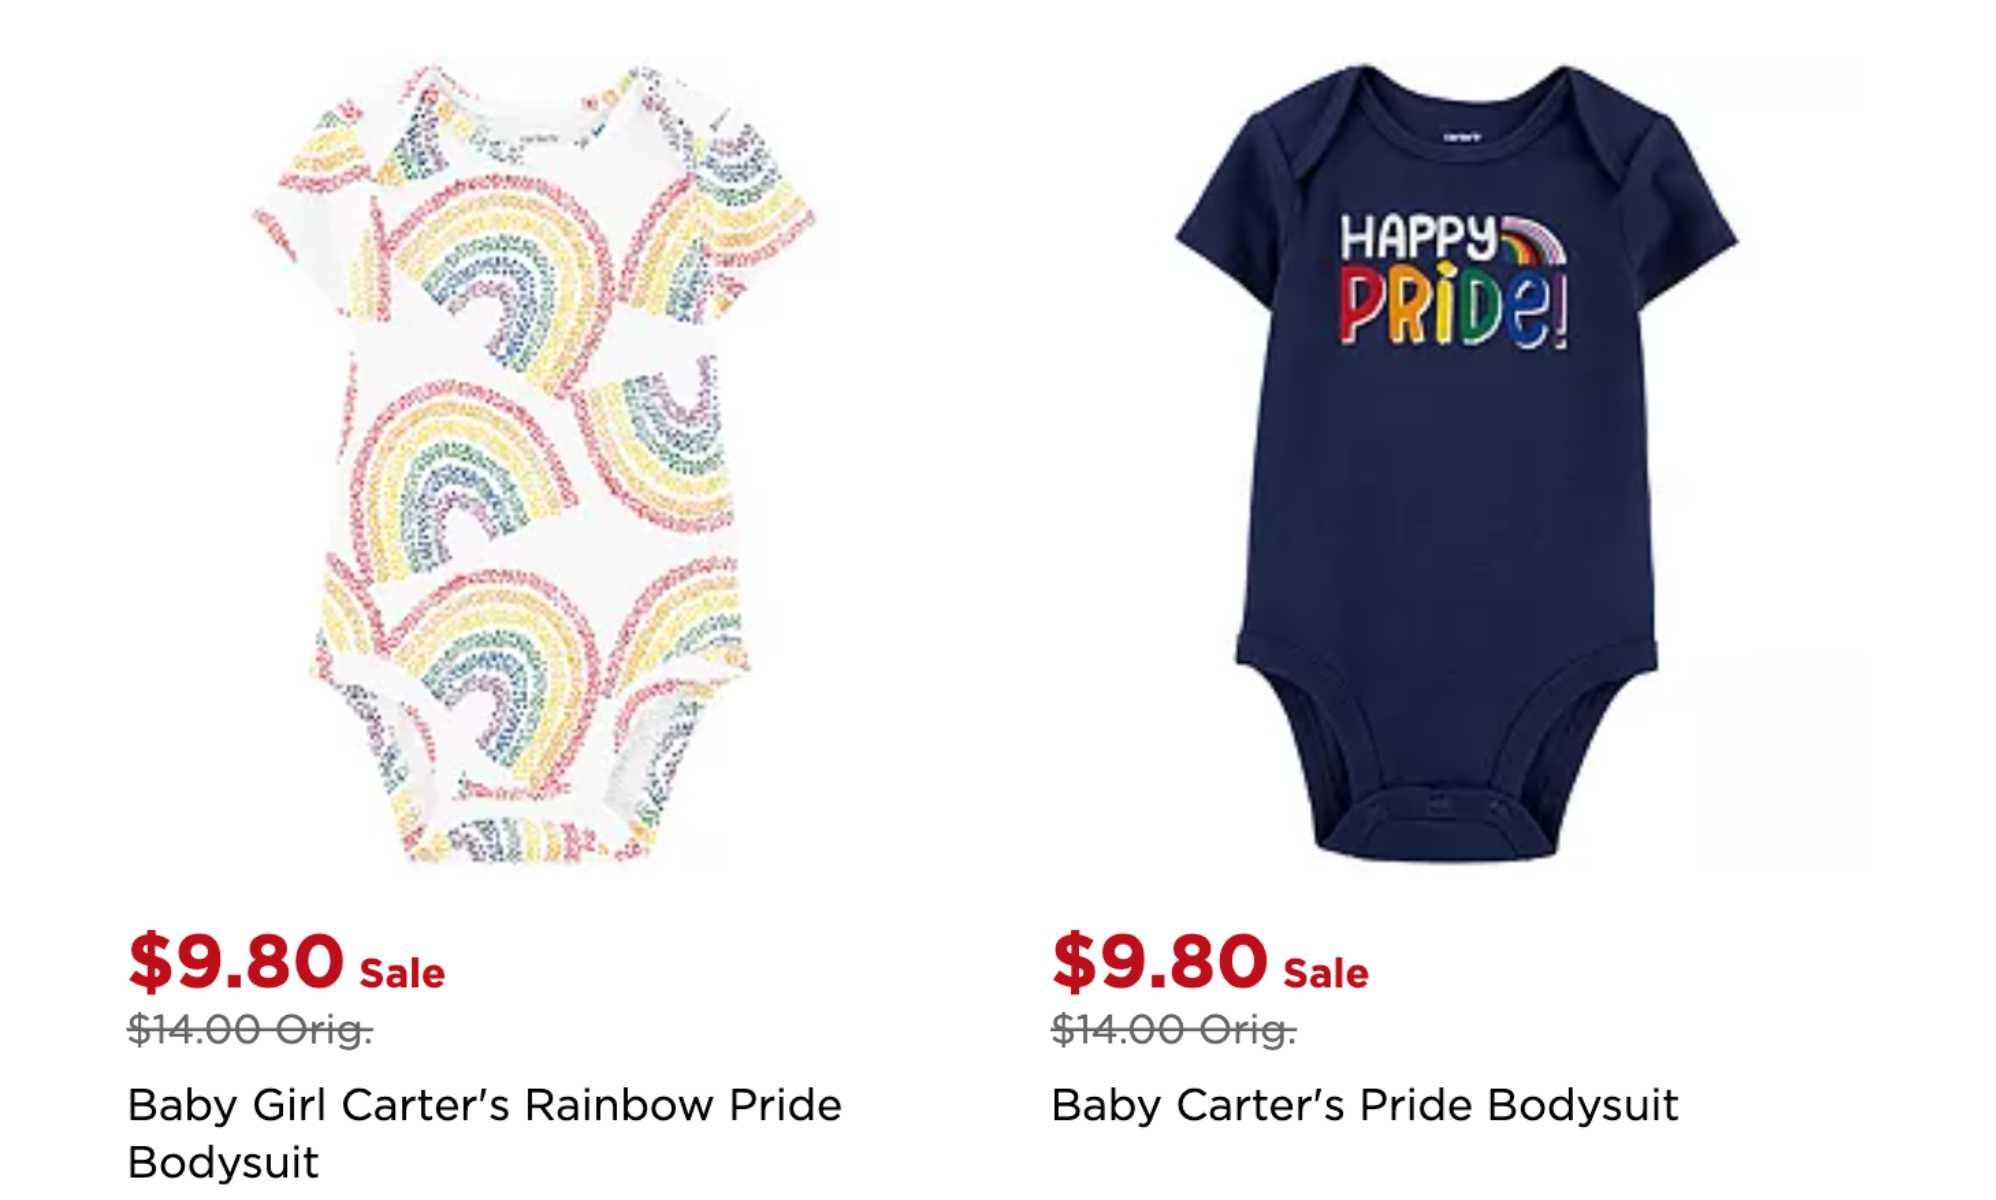 Kohl's stores threatened with boycott over Pride-themed merch